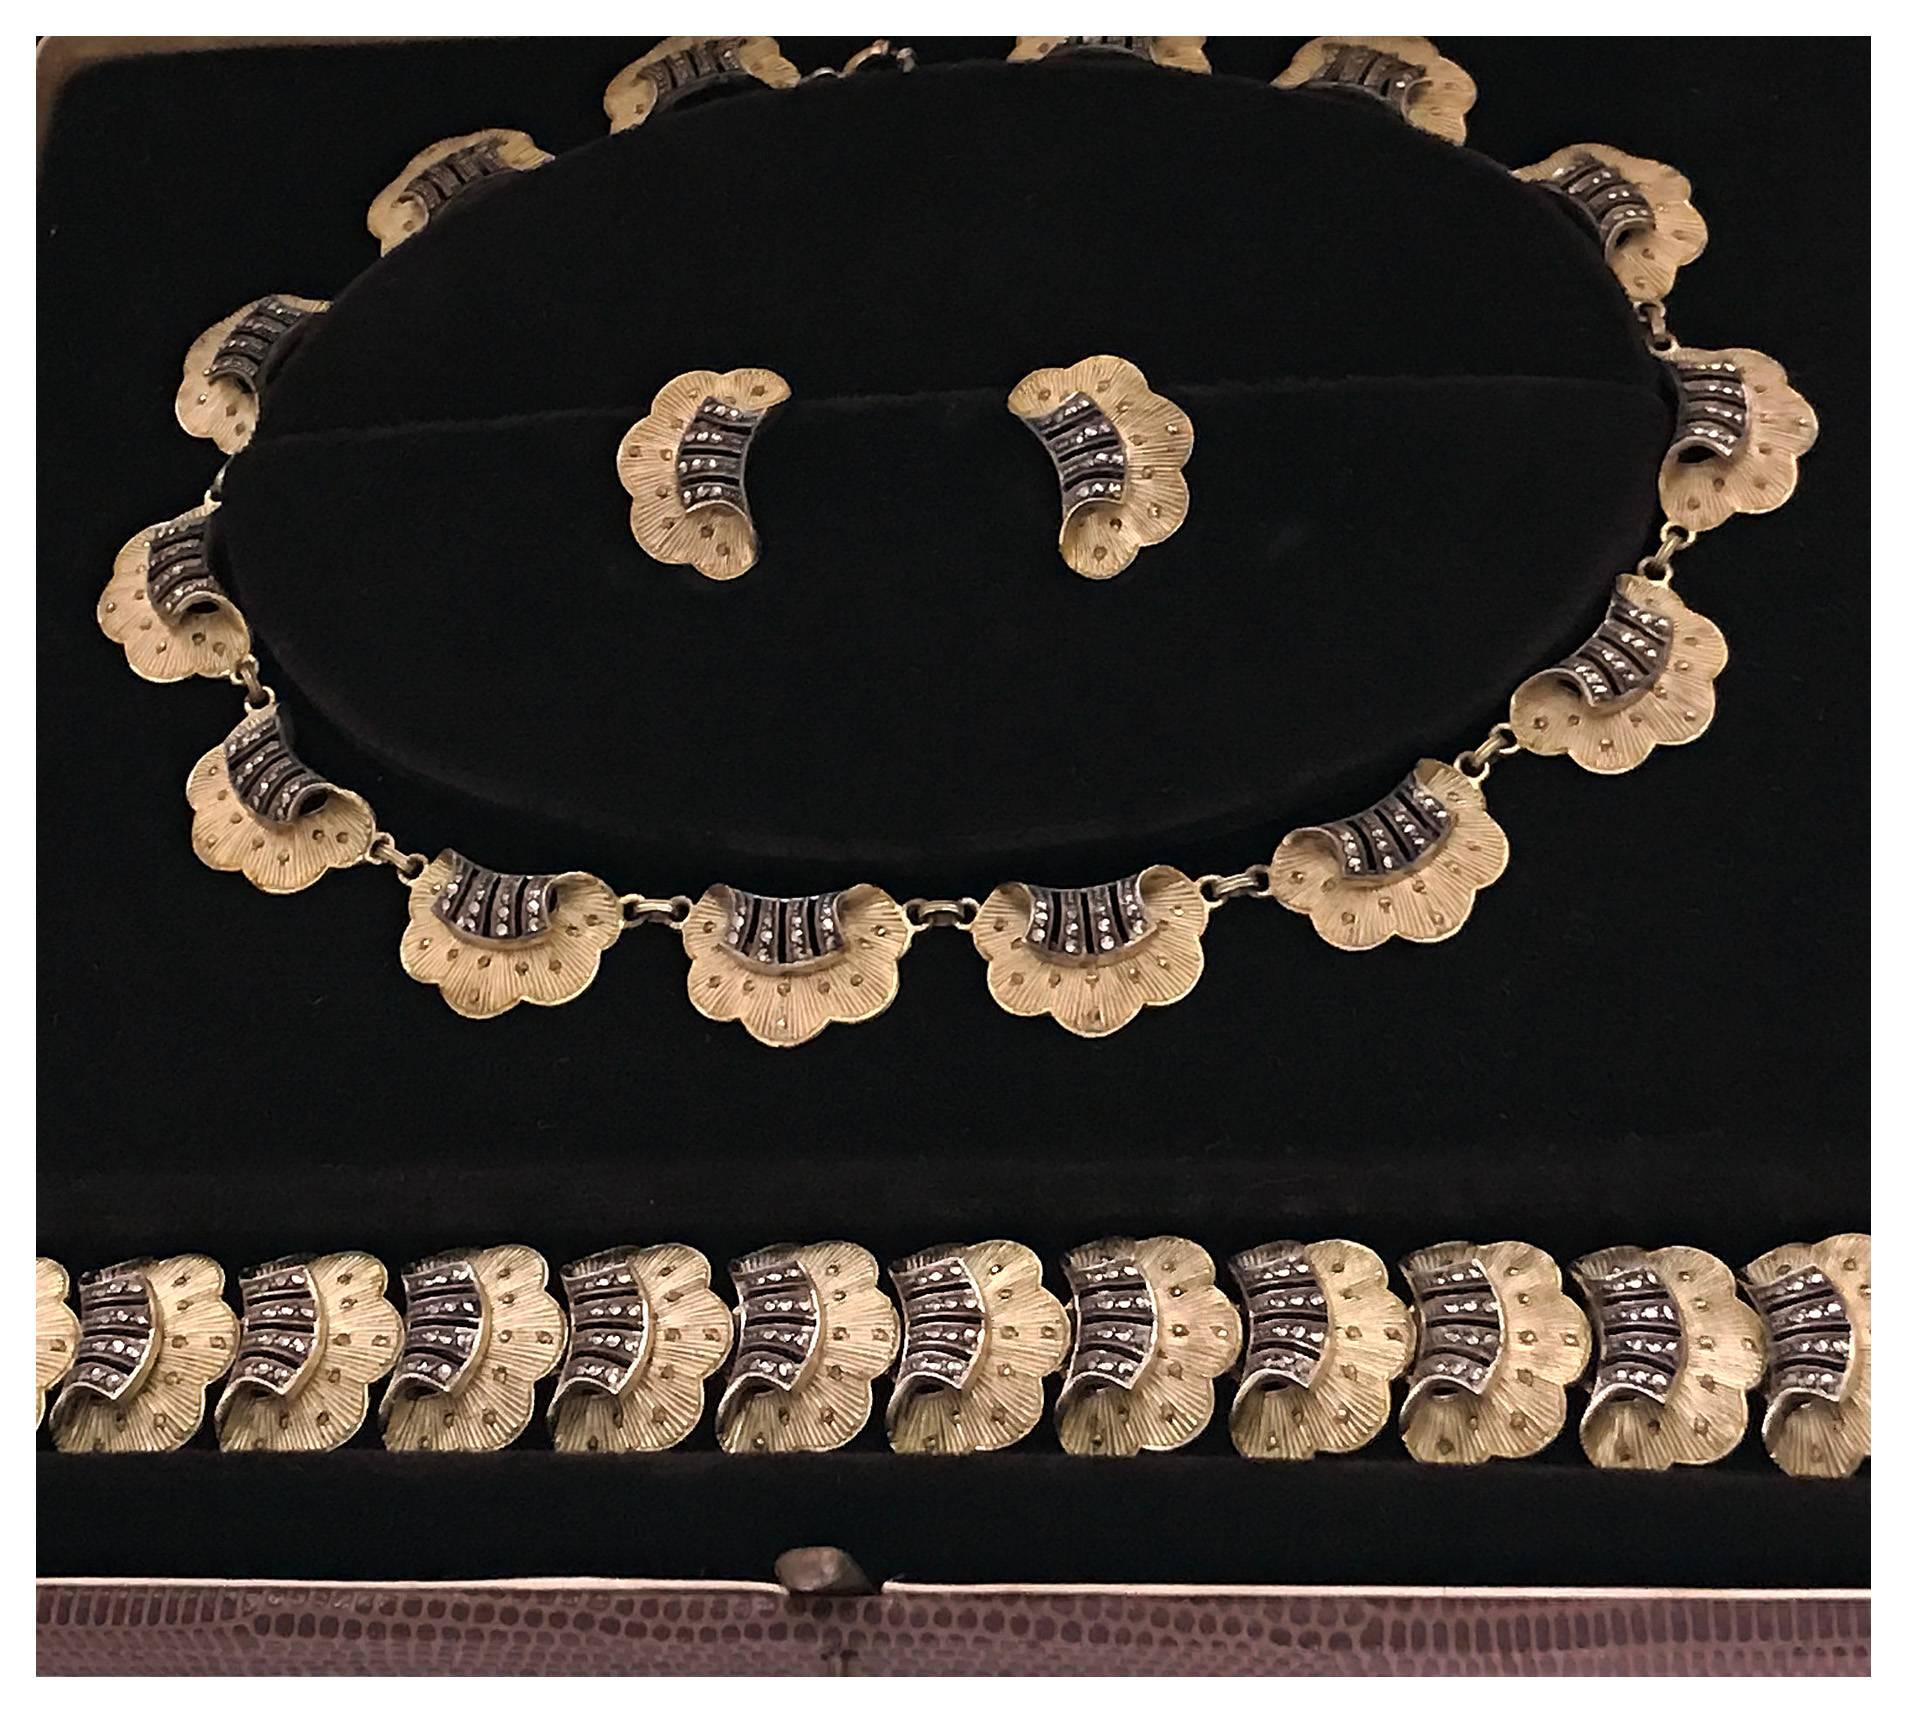 Wonderful 1930s Theodor Fahrner silver vermeil and marcasite suite of necklace, bracelet and earrings all in original fitted box. Designed by Fahrner who was one of the foremost Art Deco jewelry makers, based in Pforzheim, Germany. Measures: